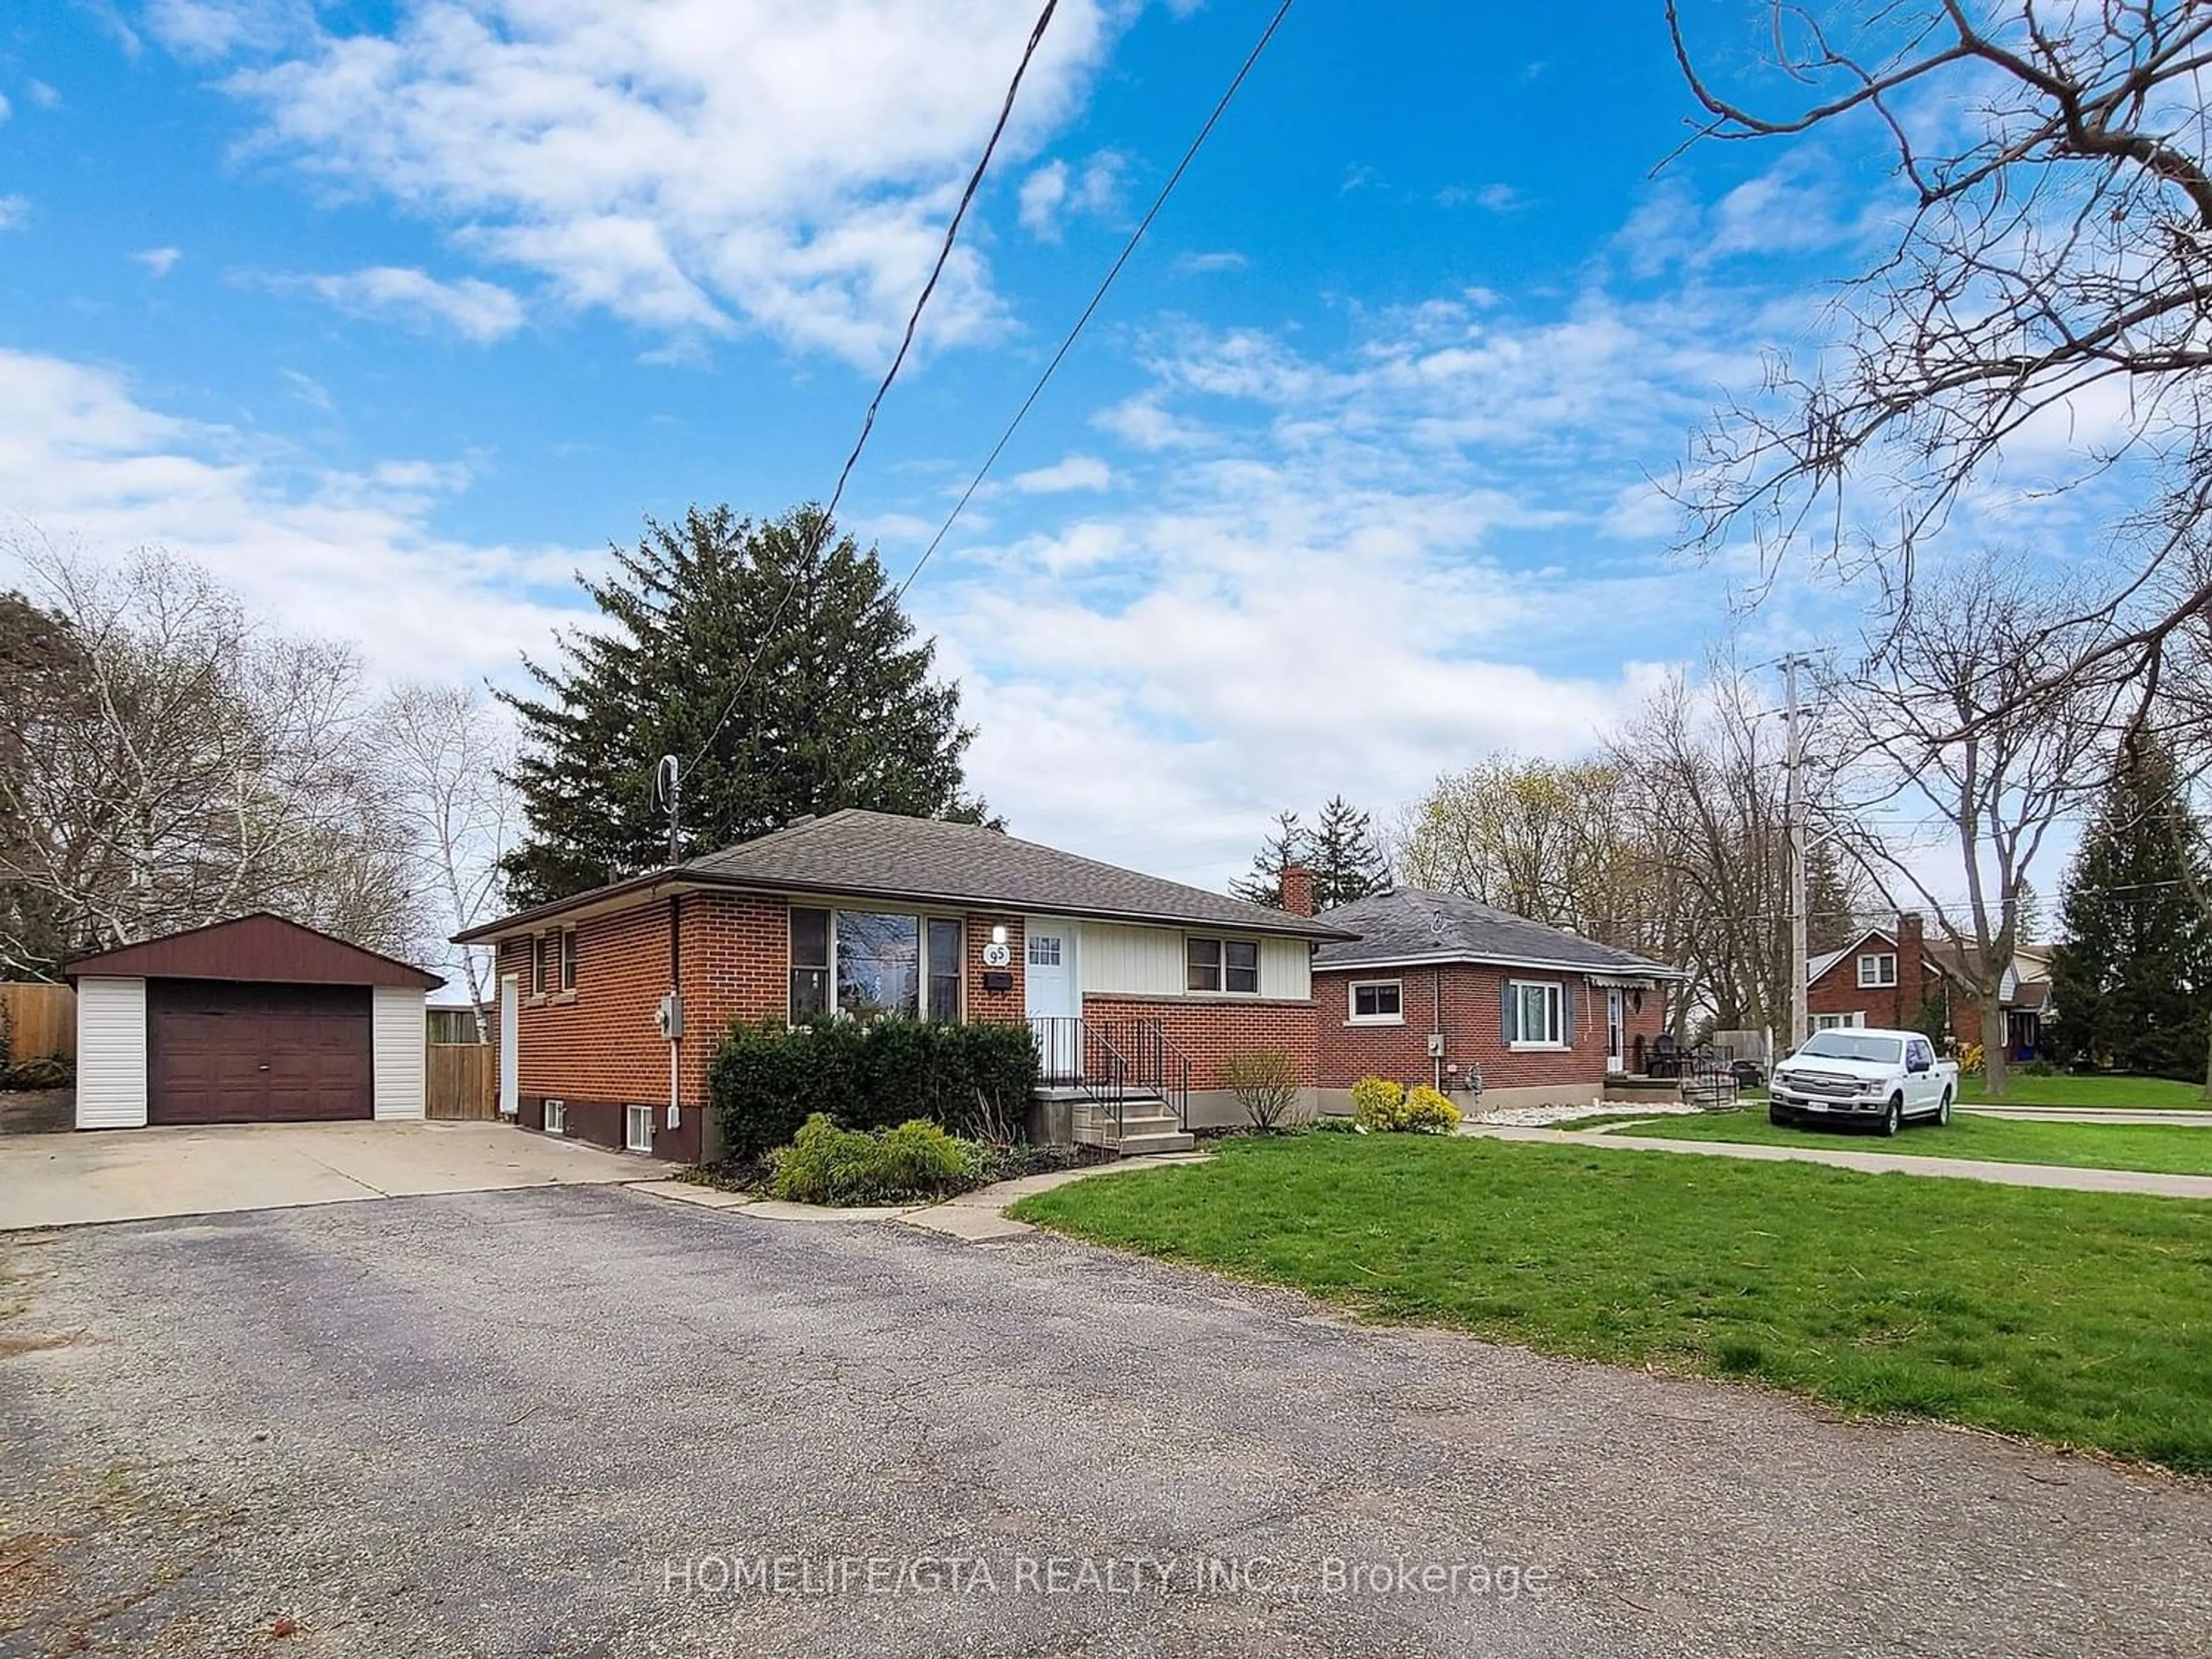 Frontside or backside of a home for 95 Clarke St, Woodstock Ontario N4S 7M4